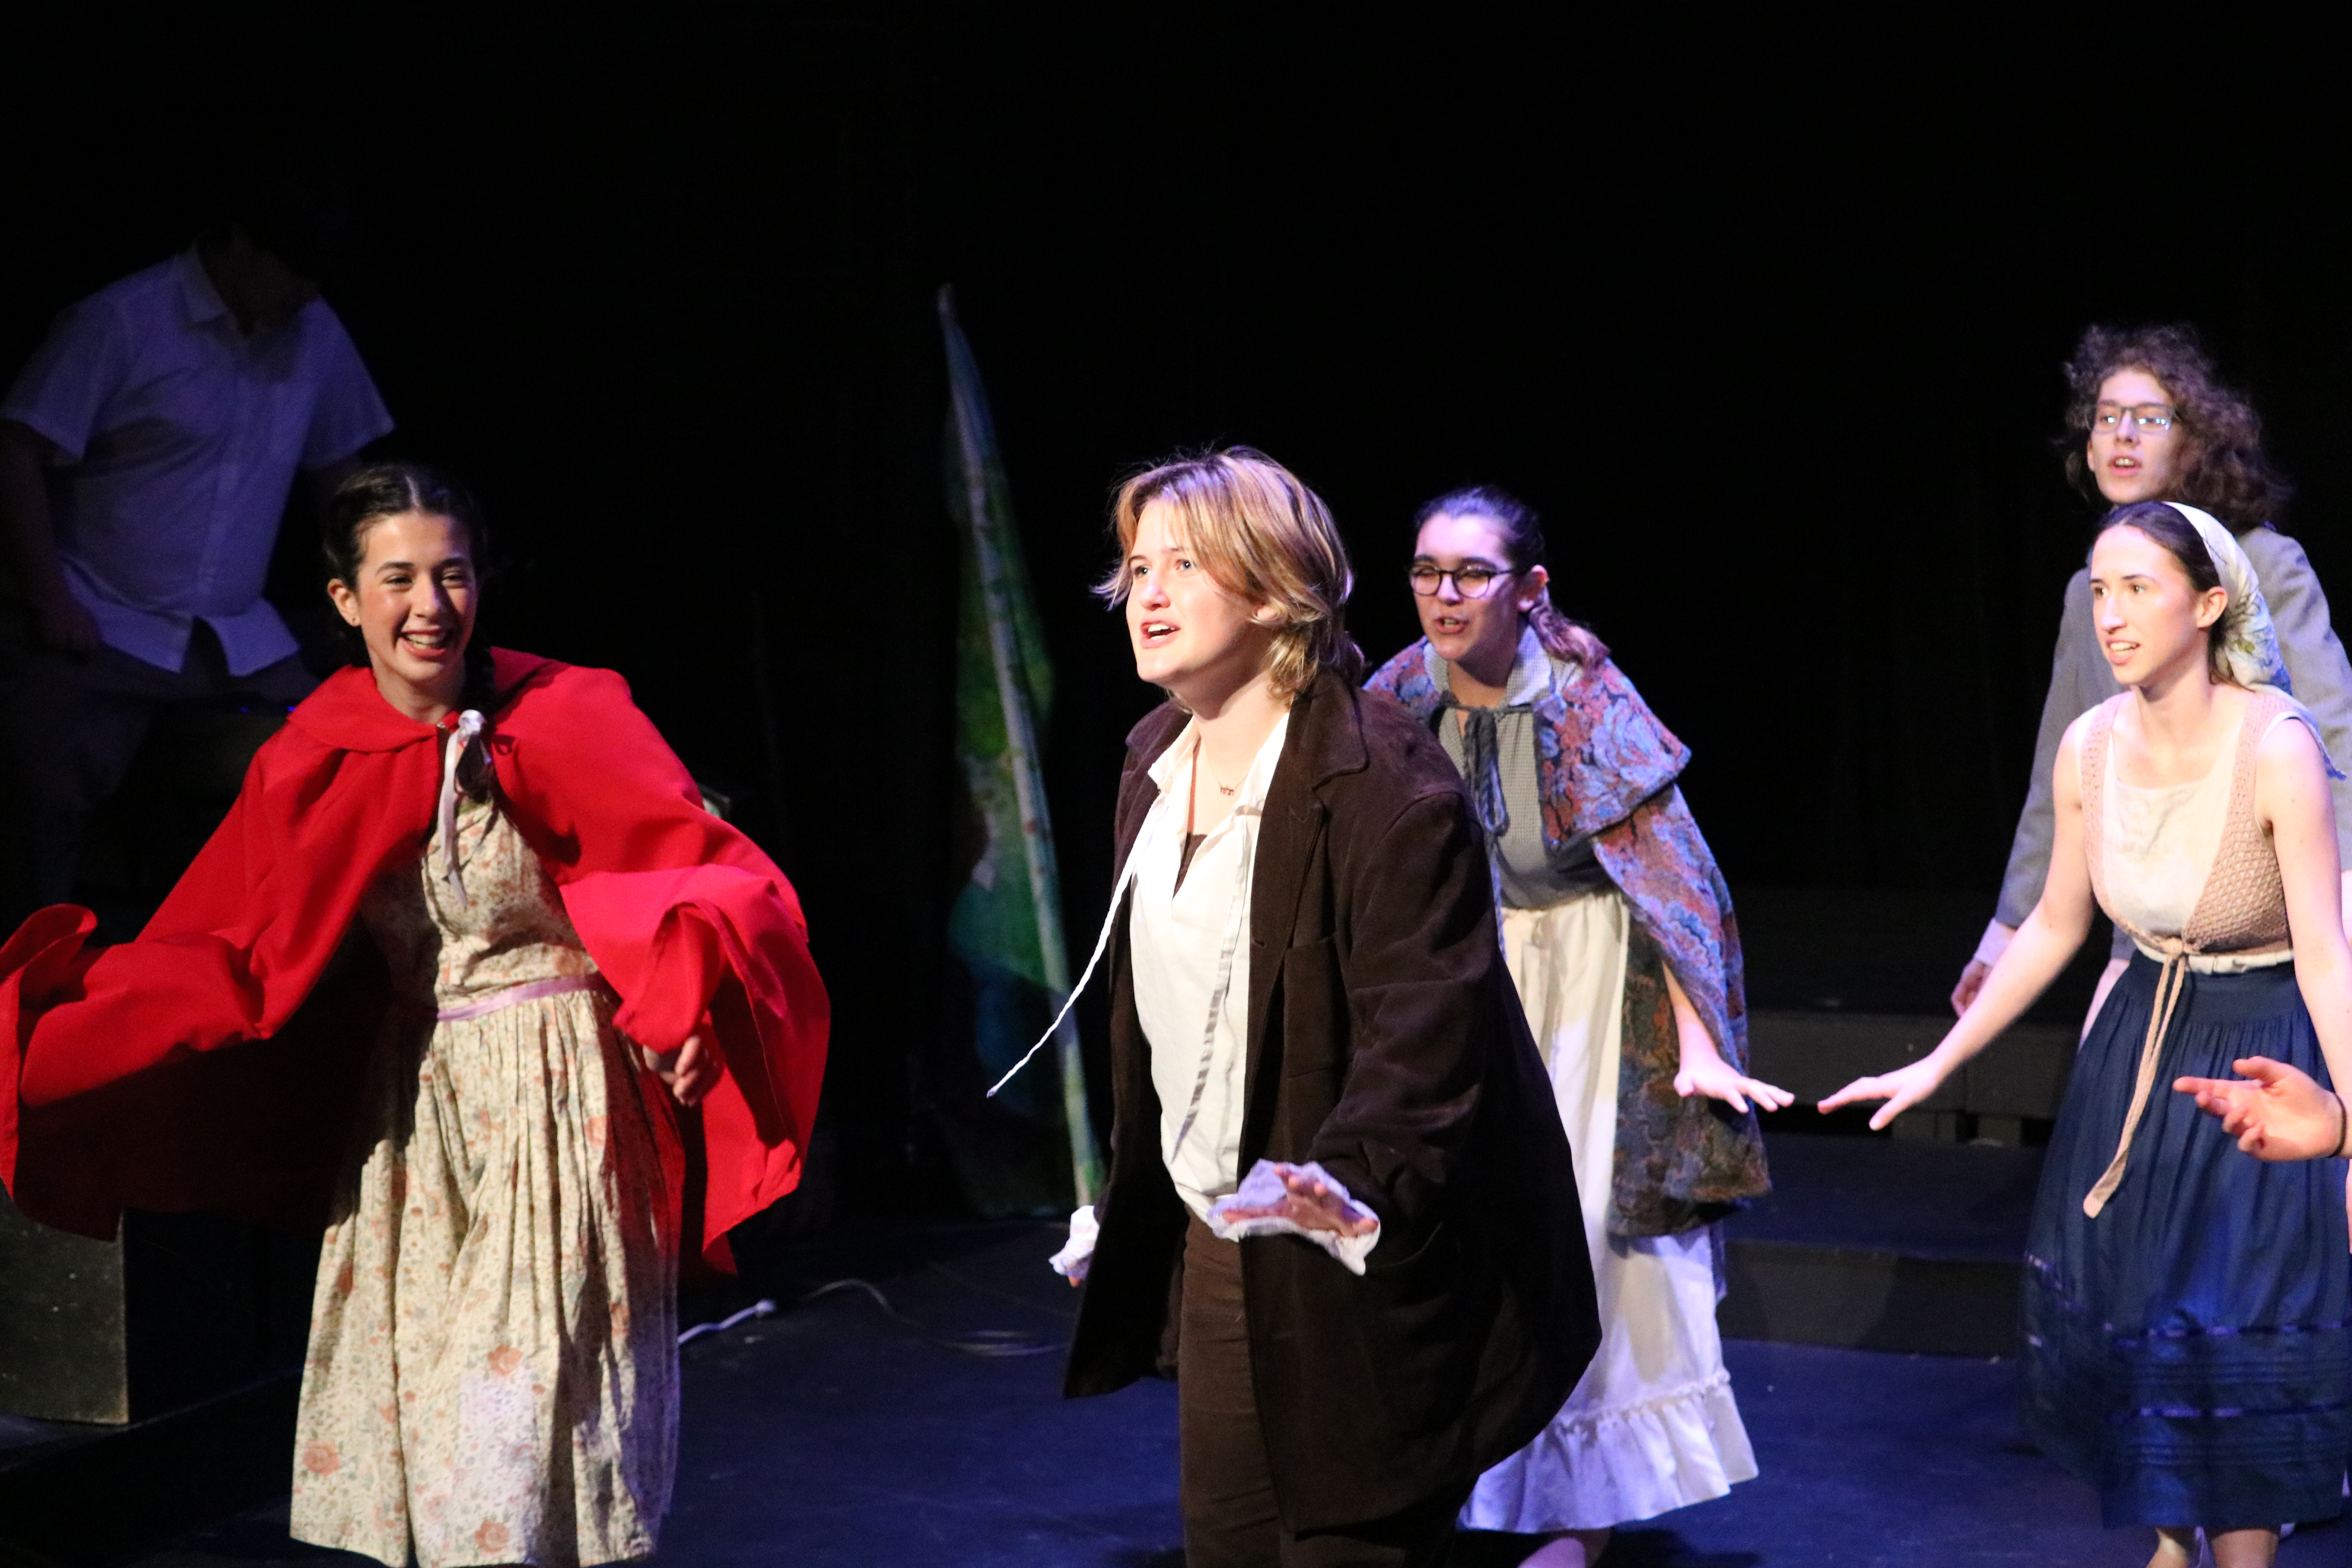 NPA high school students perform the play Into the Woods in costumes.